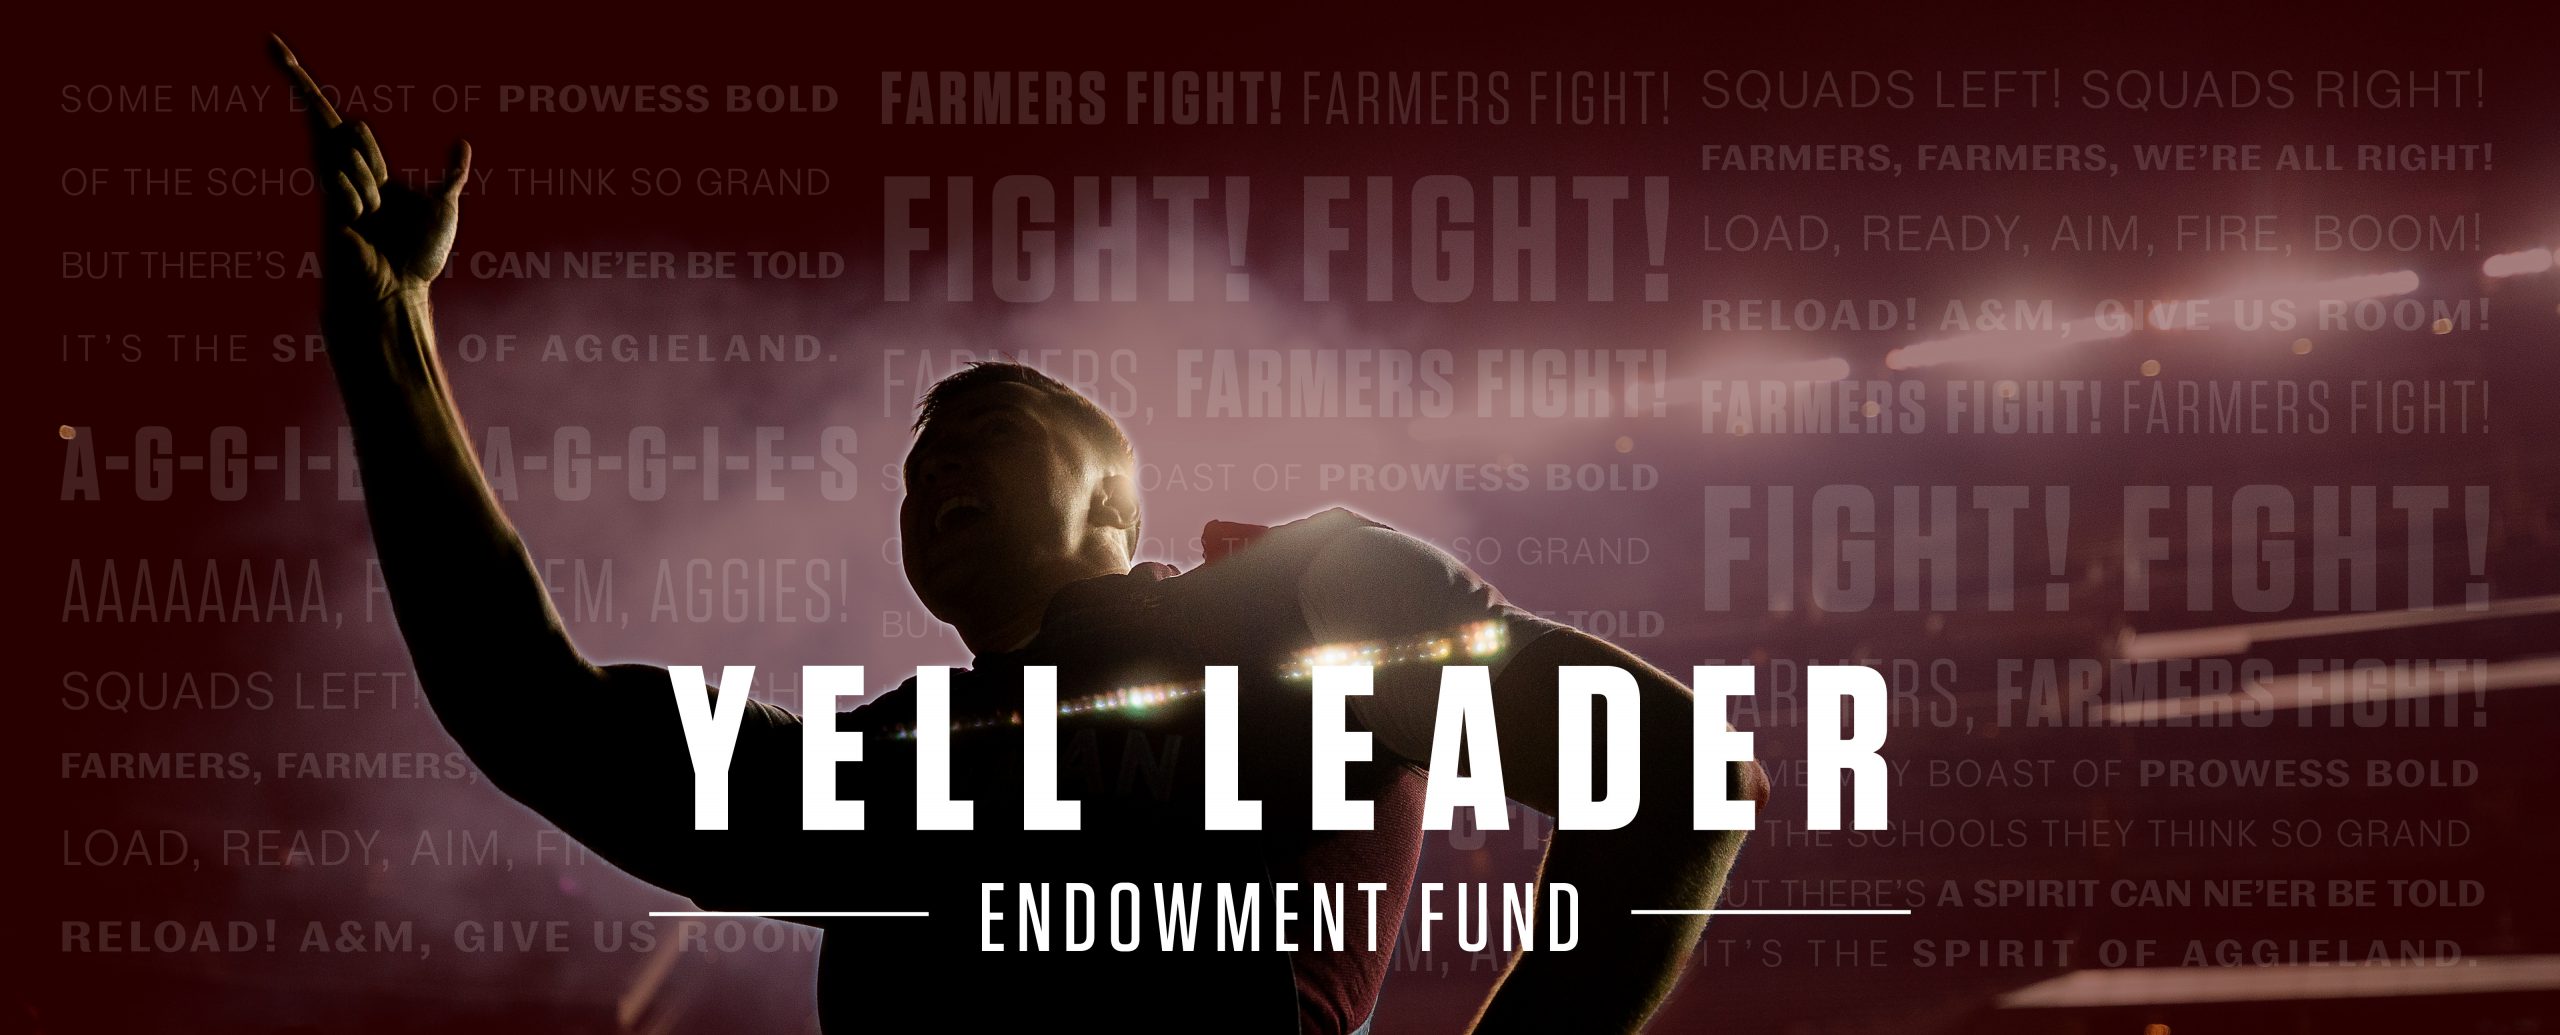 Image of Yell Leader mid yell with words from yells in the background. in the foreground, the words Yell Leader Endowment fund